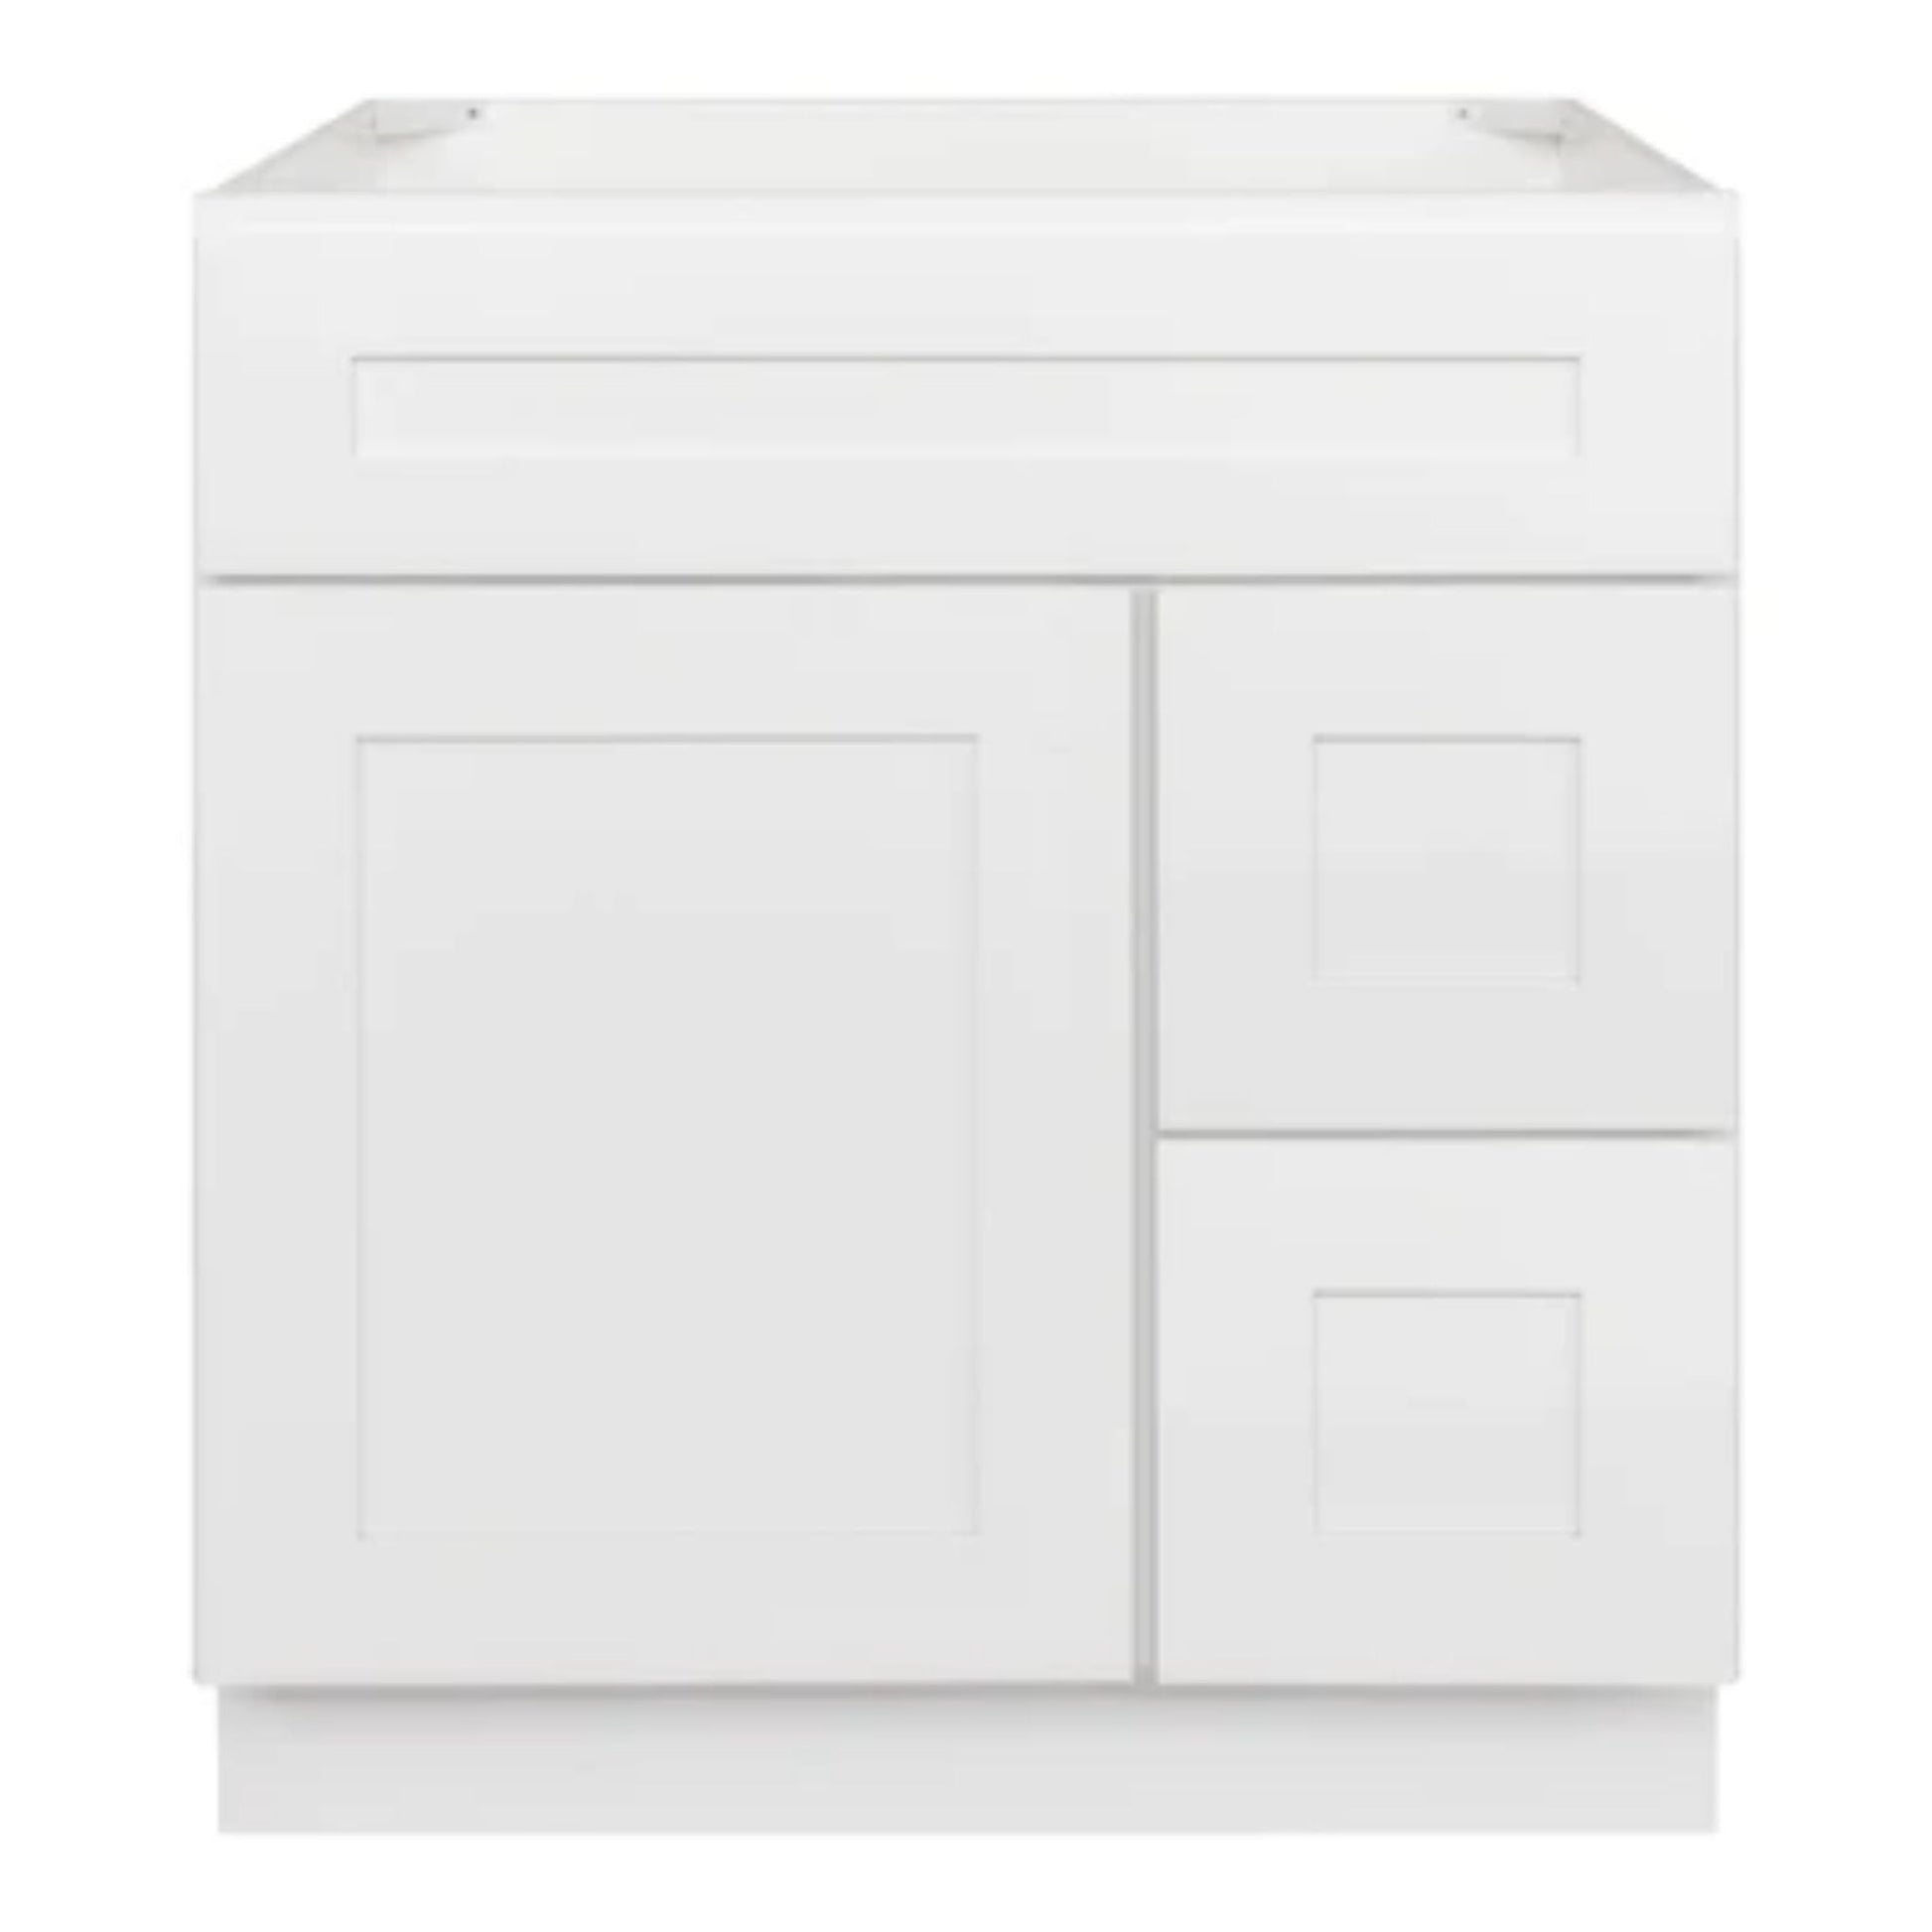 LessCare 30" x 21" x 34 1/2" Alpina White Vanity Sink Base Cabinet with Right Drawers